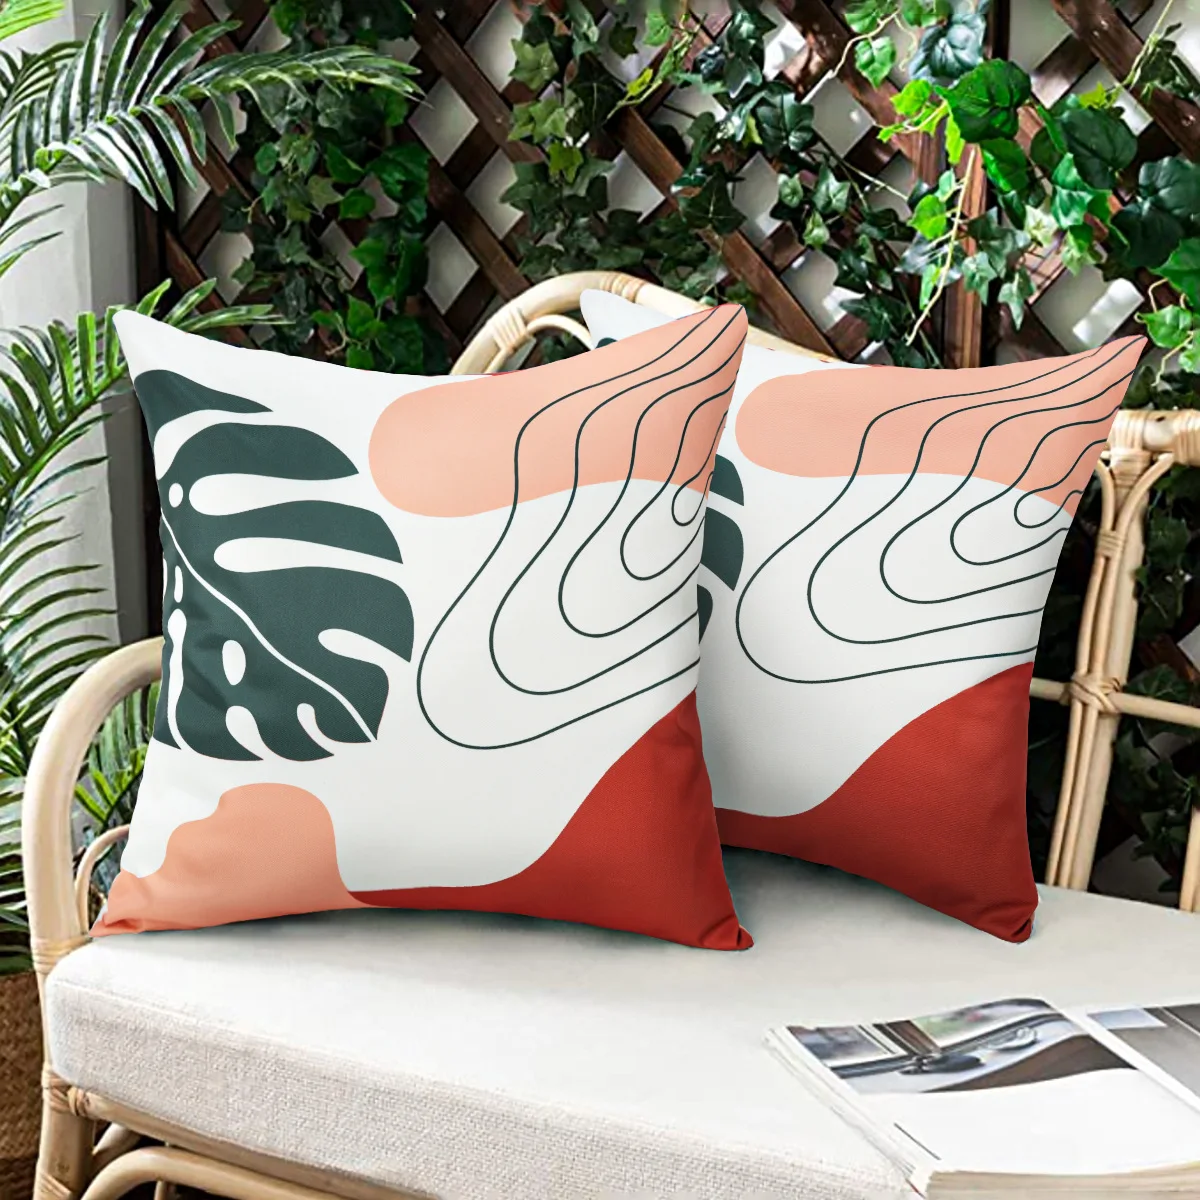 

Simple Printed Rattan Chair Cushion Cover Waterproof Pillow Cover 45x45cm Summer Outdoor Pillowcase for Home Garden Decoration